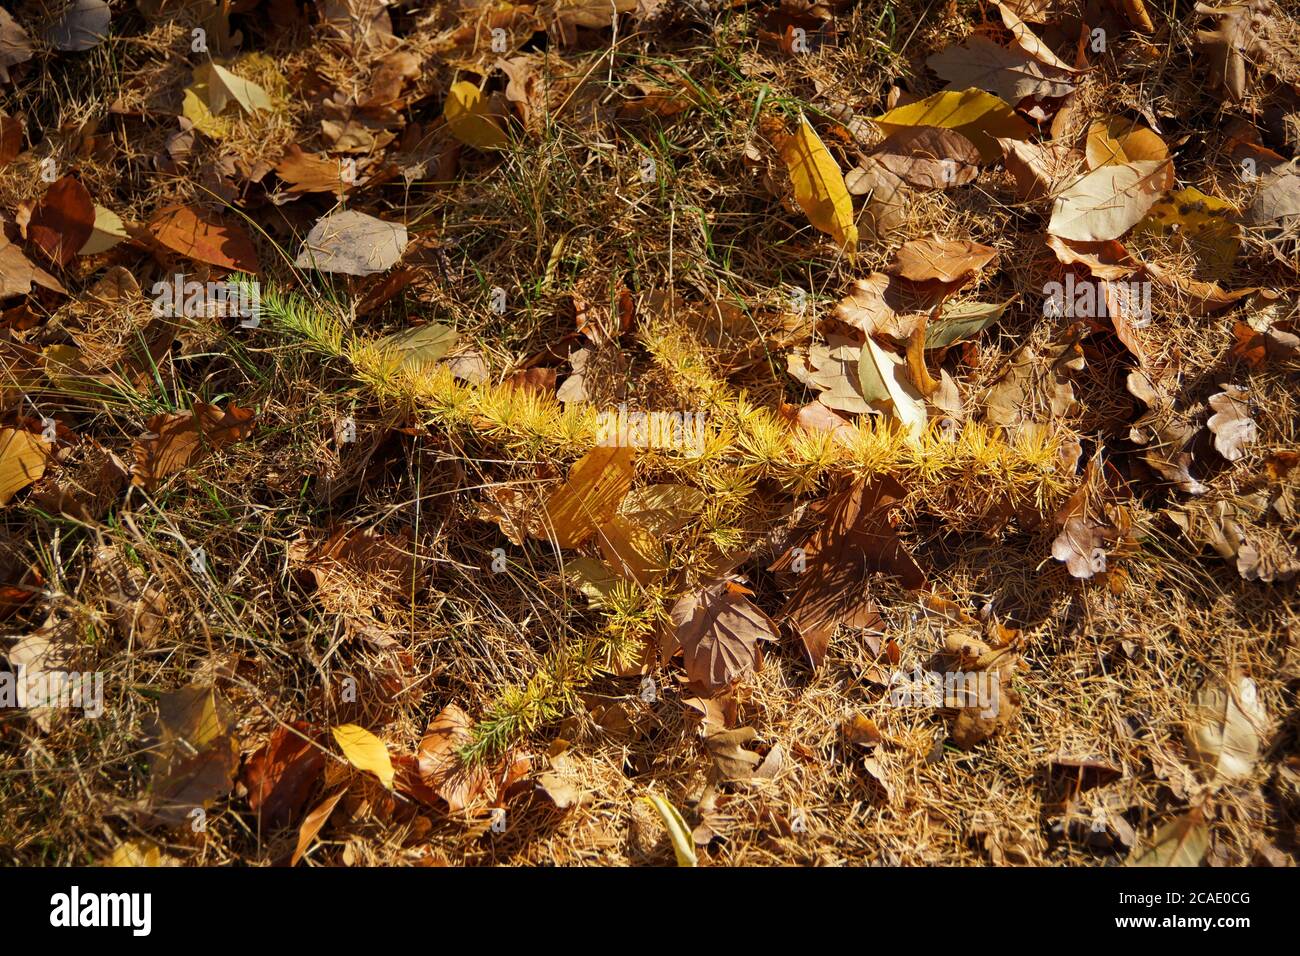 November in the forest, autumn morning walk, larch branch and fallen leaves in a forest clearing Stock Photo